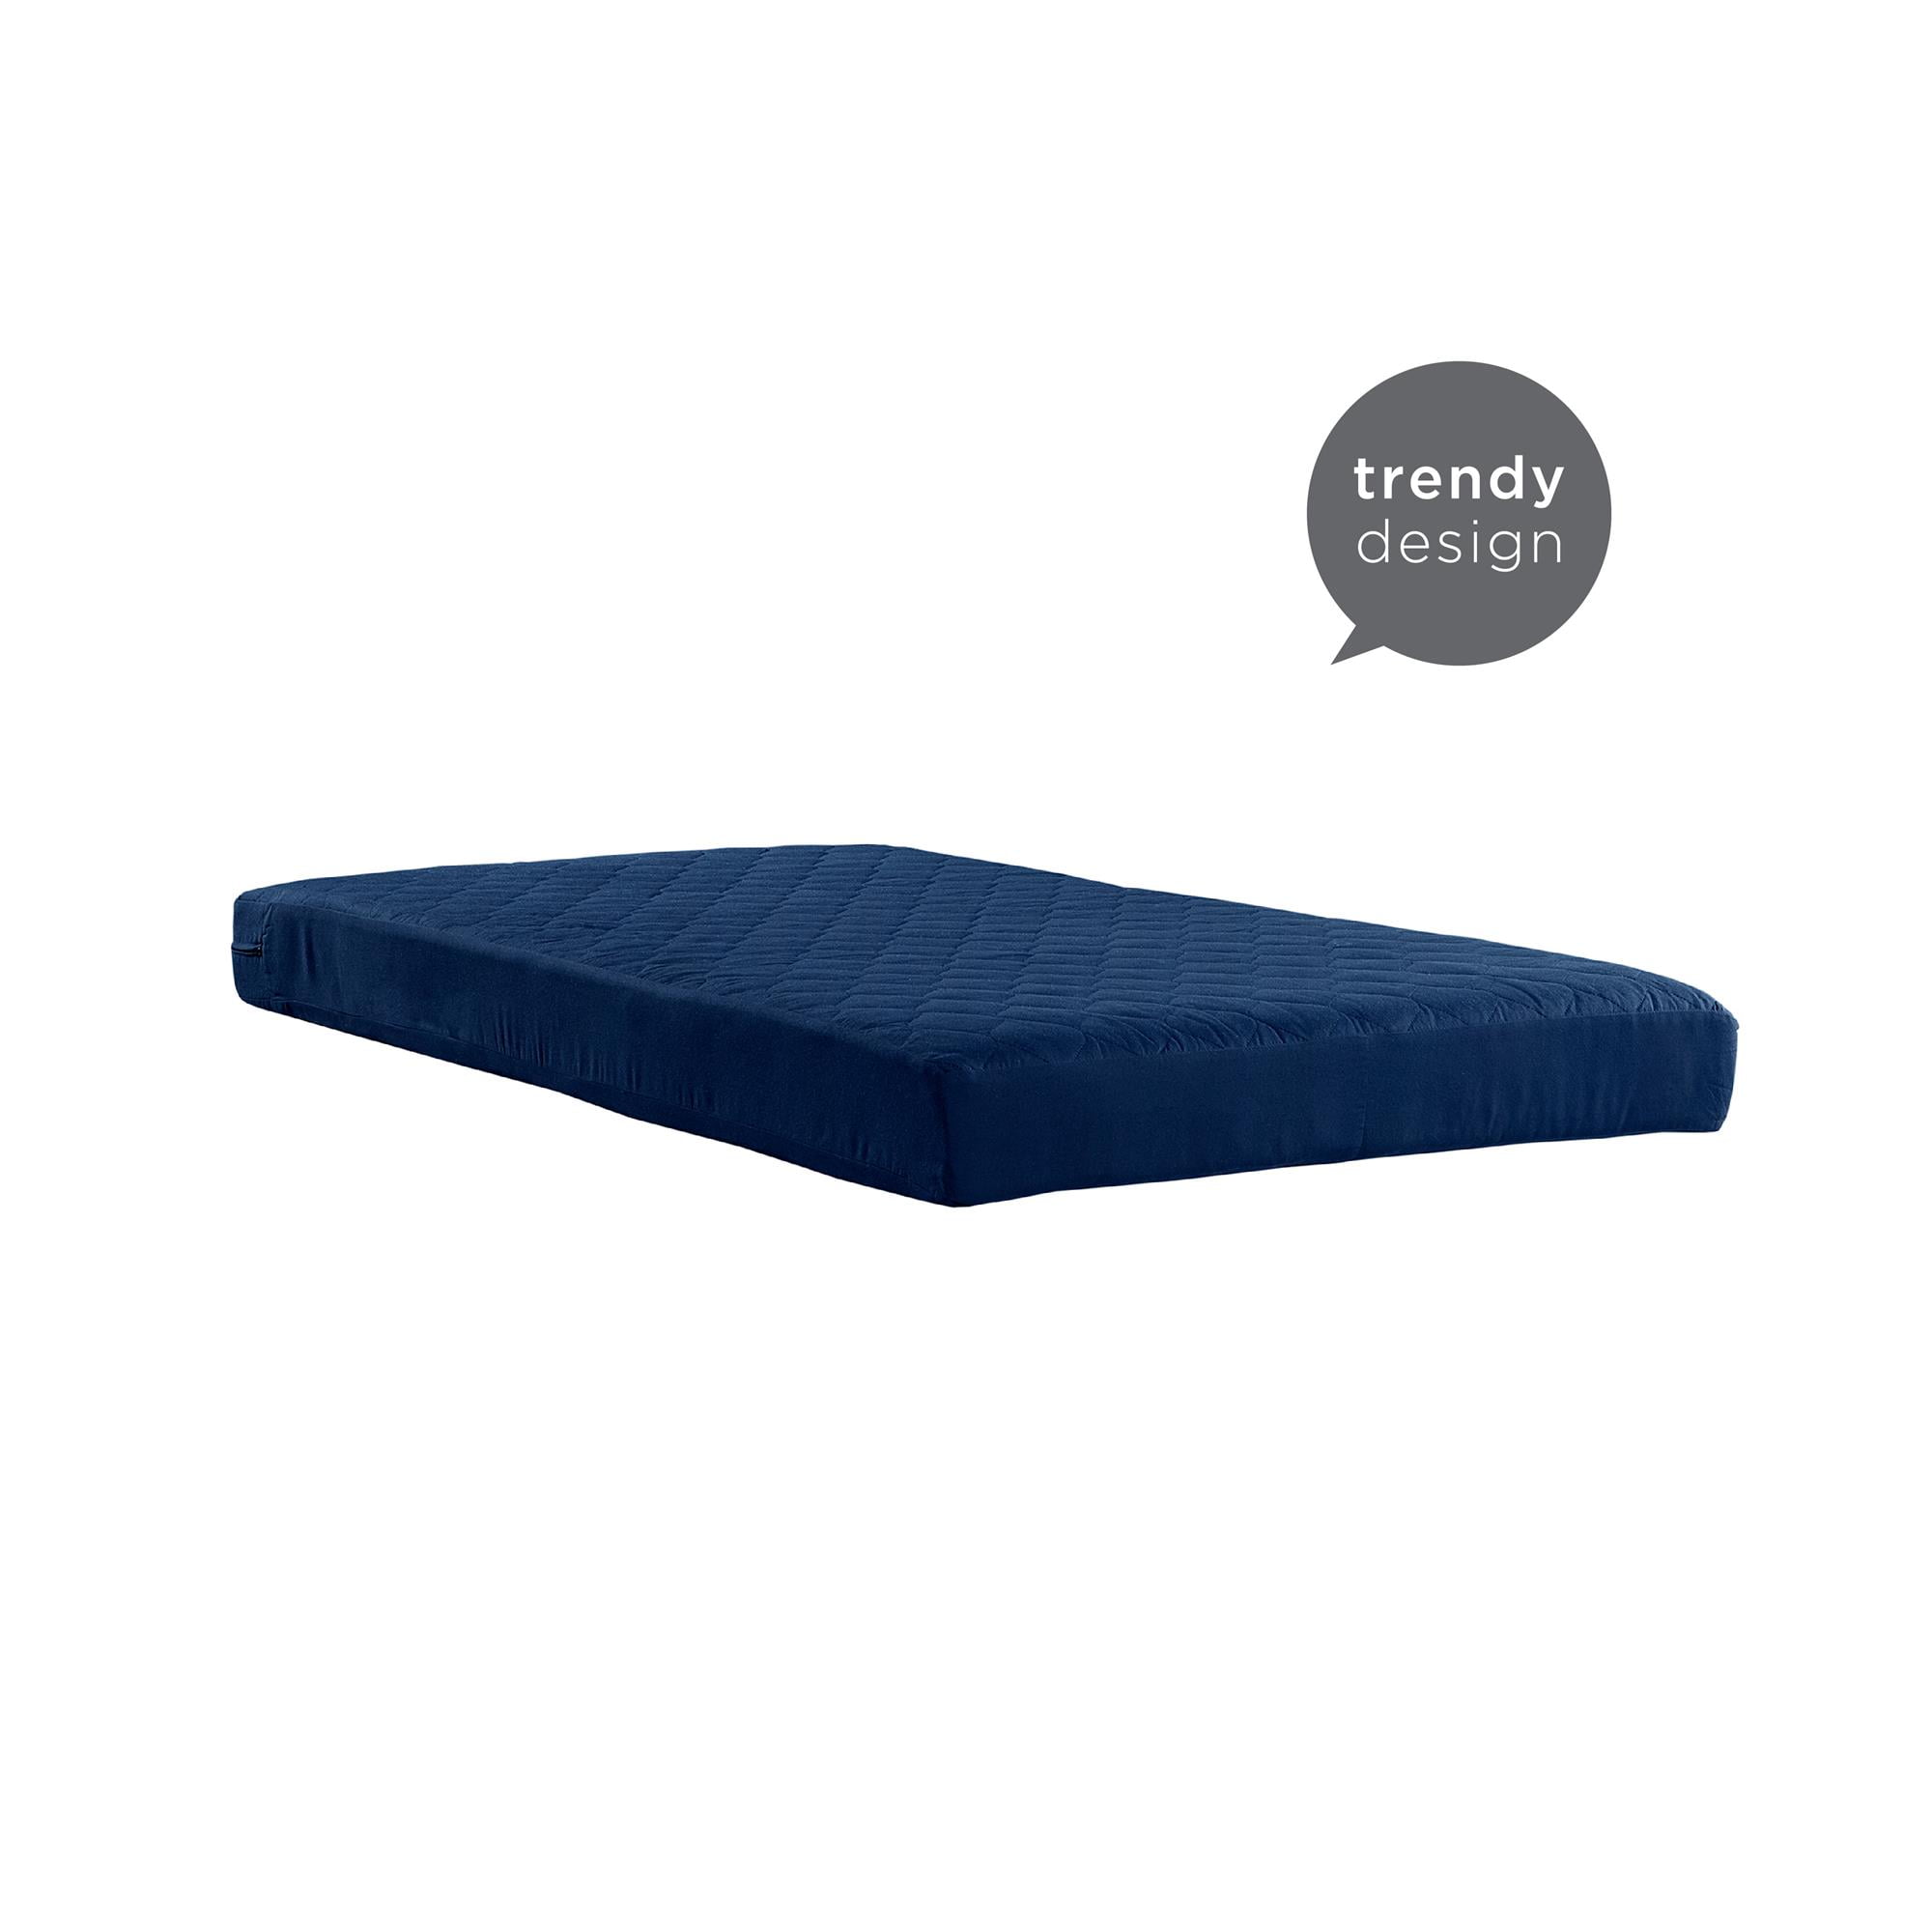 Bunk Bed Mattress Full Size 6 Inch Navy Quilted Comfort Bedding Removable Cover 